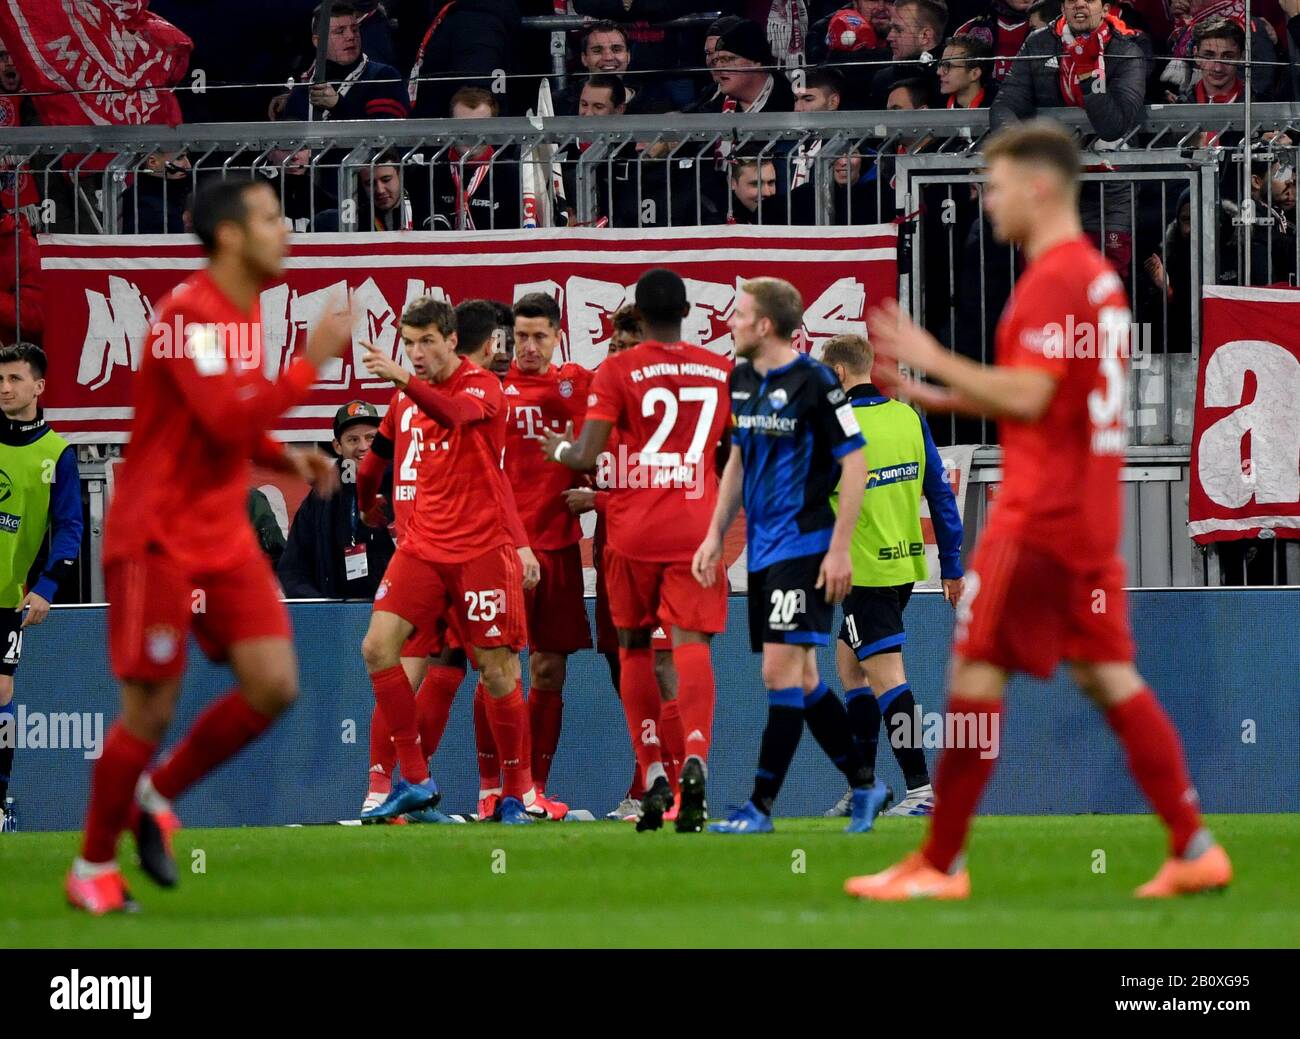 Munich, Germany. 21st Feb, 2020. Football: Bundesliga, Bayern Munich - SC Paderborn 07, 23rd matchday in the Allianz Arena. The team of FC Bayern Munich cheers after the 2:1 goals in the 2nd half by Robert Lewandowski (M). Credit: Peter Kneffel/dpa - IMPORTANT NOTE: In accordance with the regulations of the DFL Deutsche Fußball Liga and the DFB Deutscher Fußball-Bund, it is prohibited to exploit or have exploited in the stadium and/or from the game taken photographs in the form of sequence images and/or video-like photo series./dpa/Alamy Live News Stock Photo